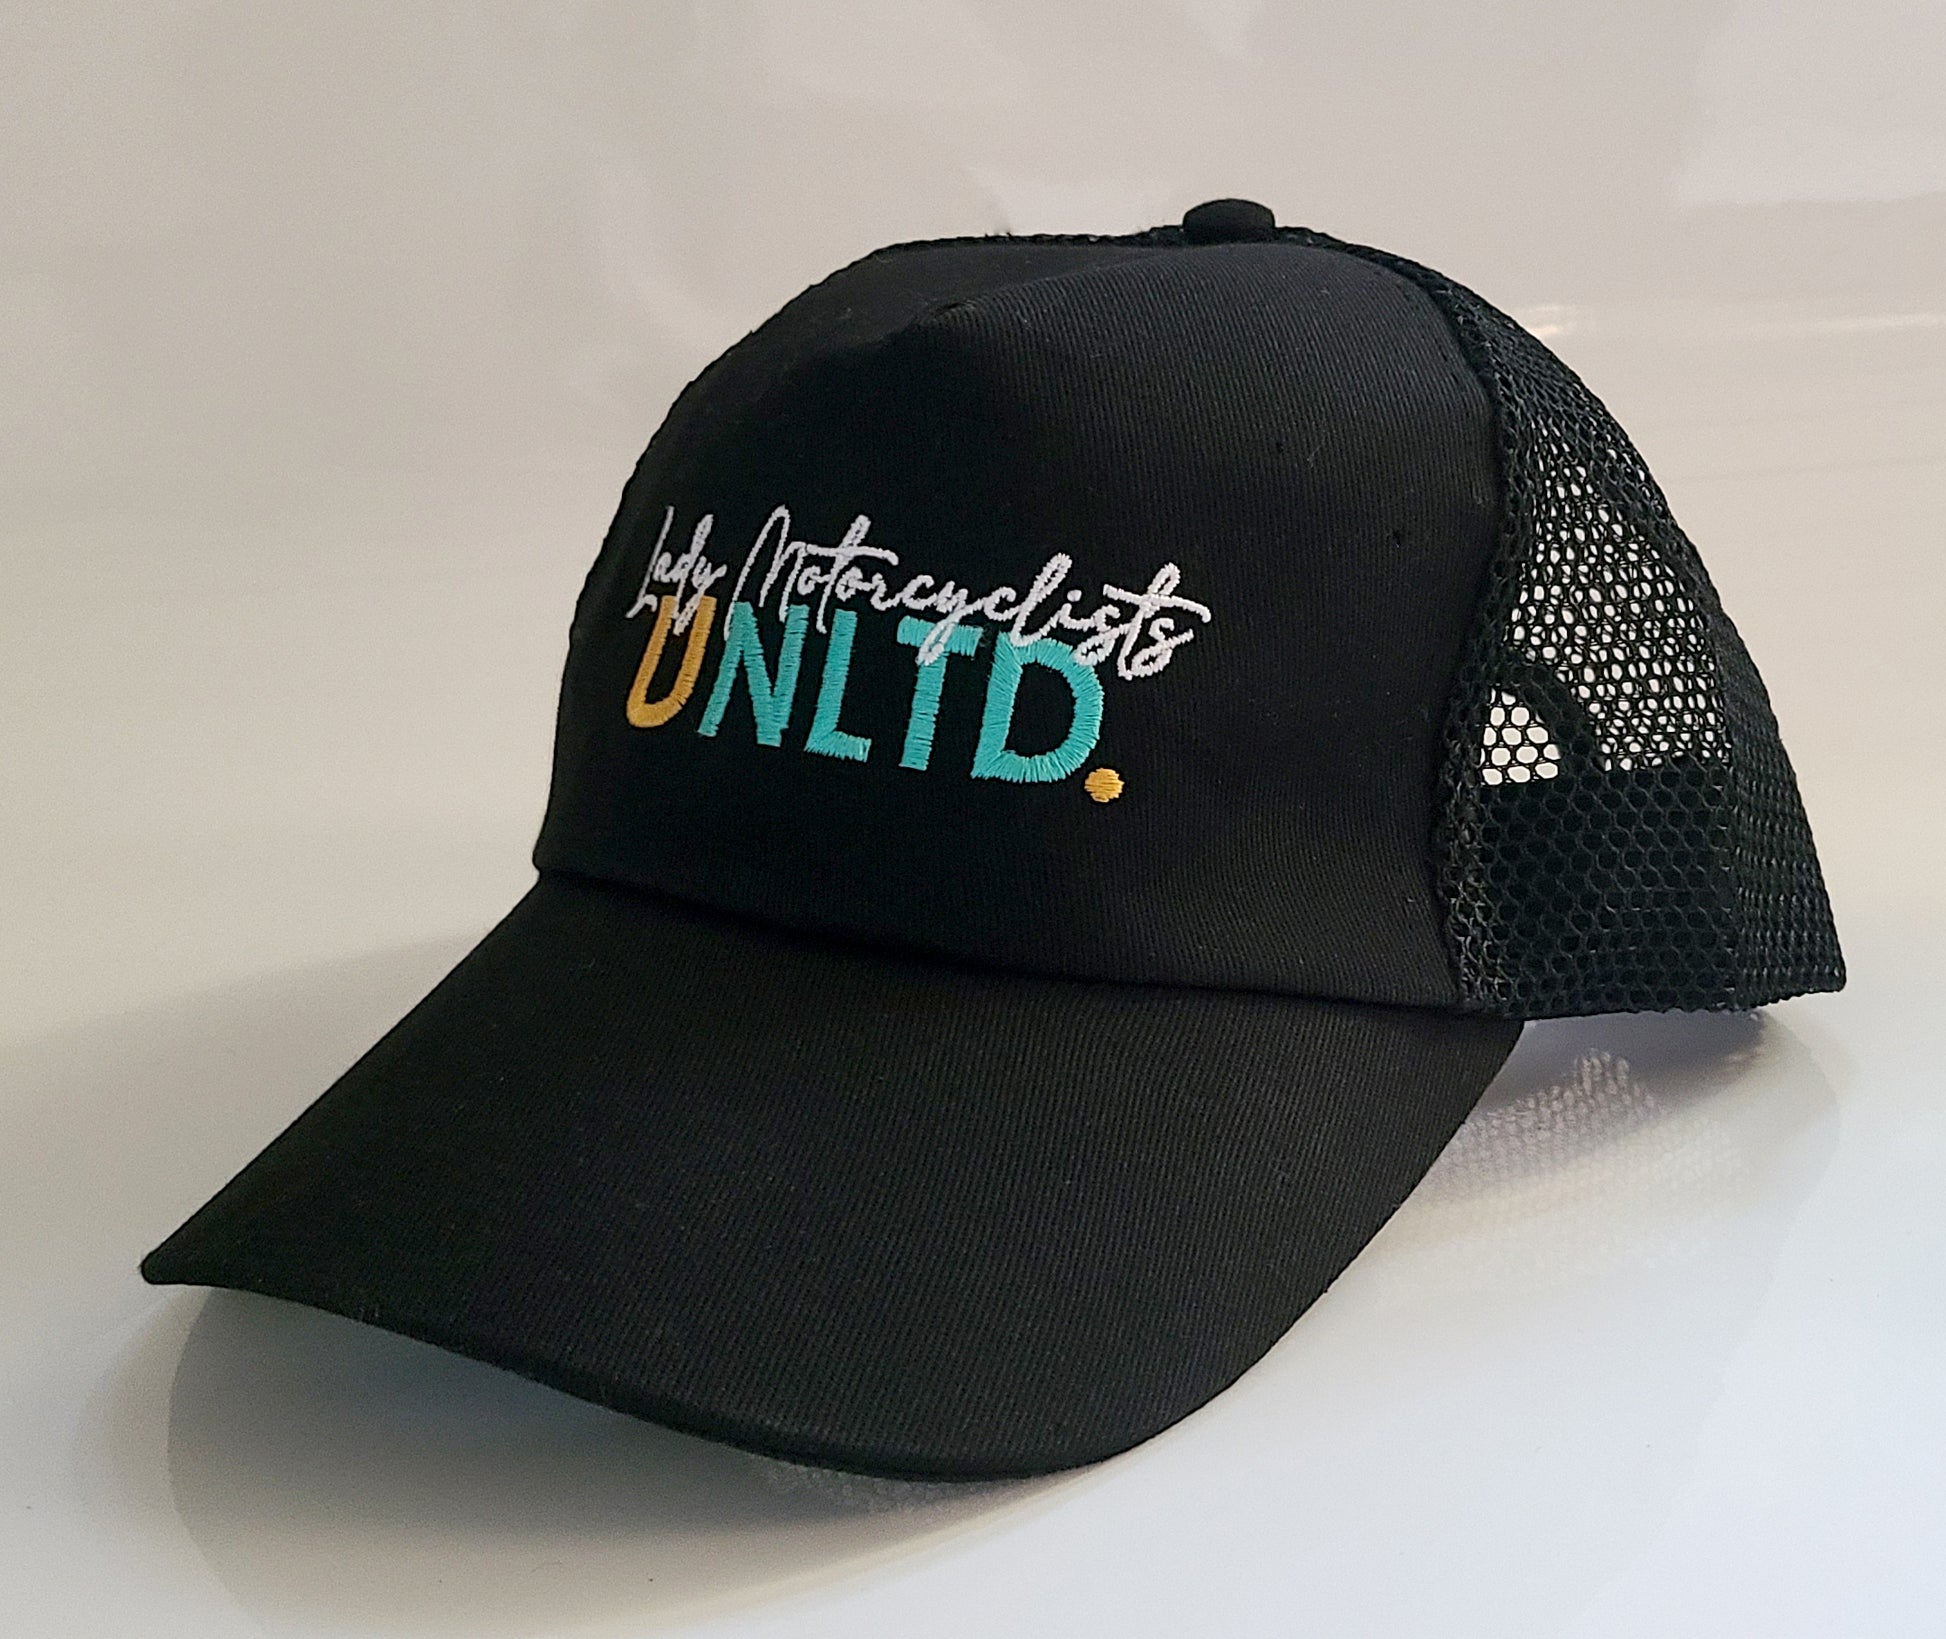 side view embroidered Lady Motorcyclists Unlimited trucker style cap